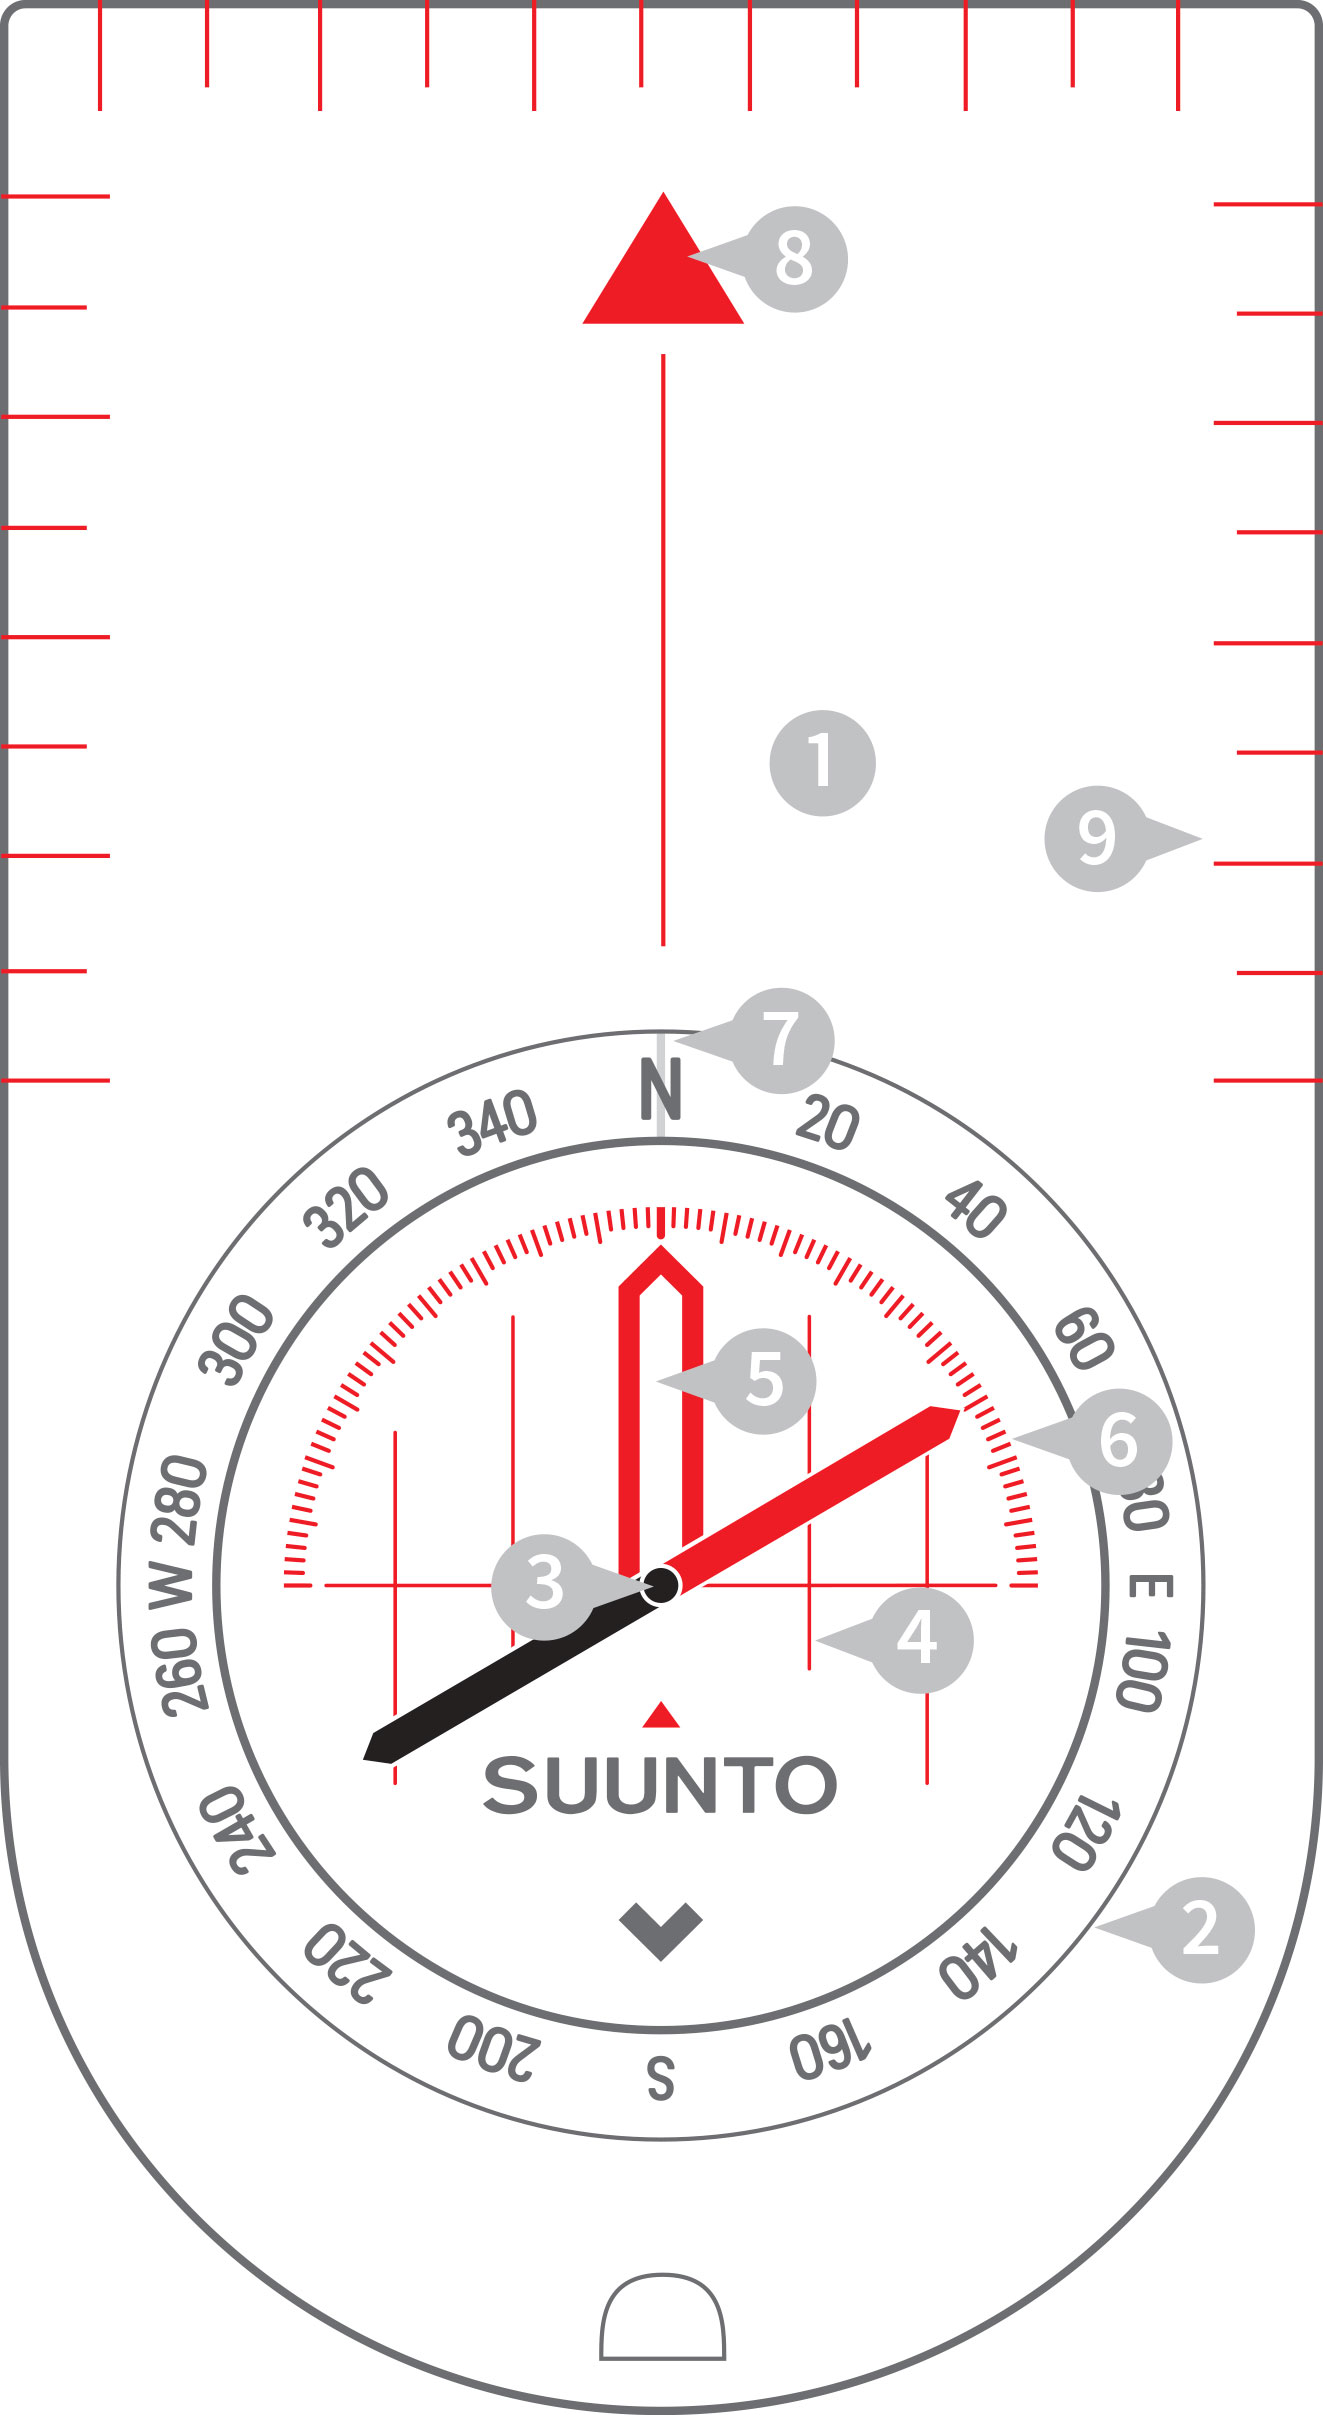 How to use an orienteering compass